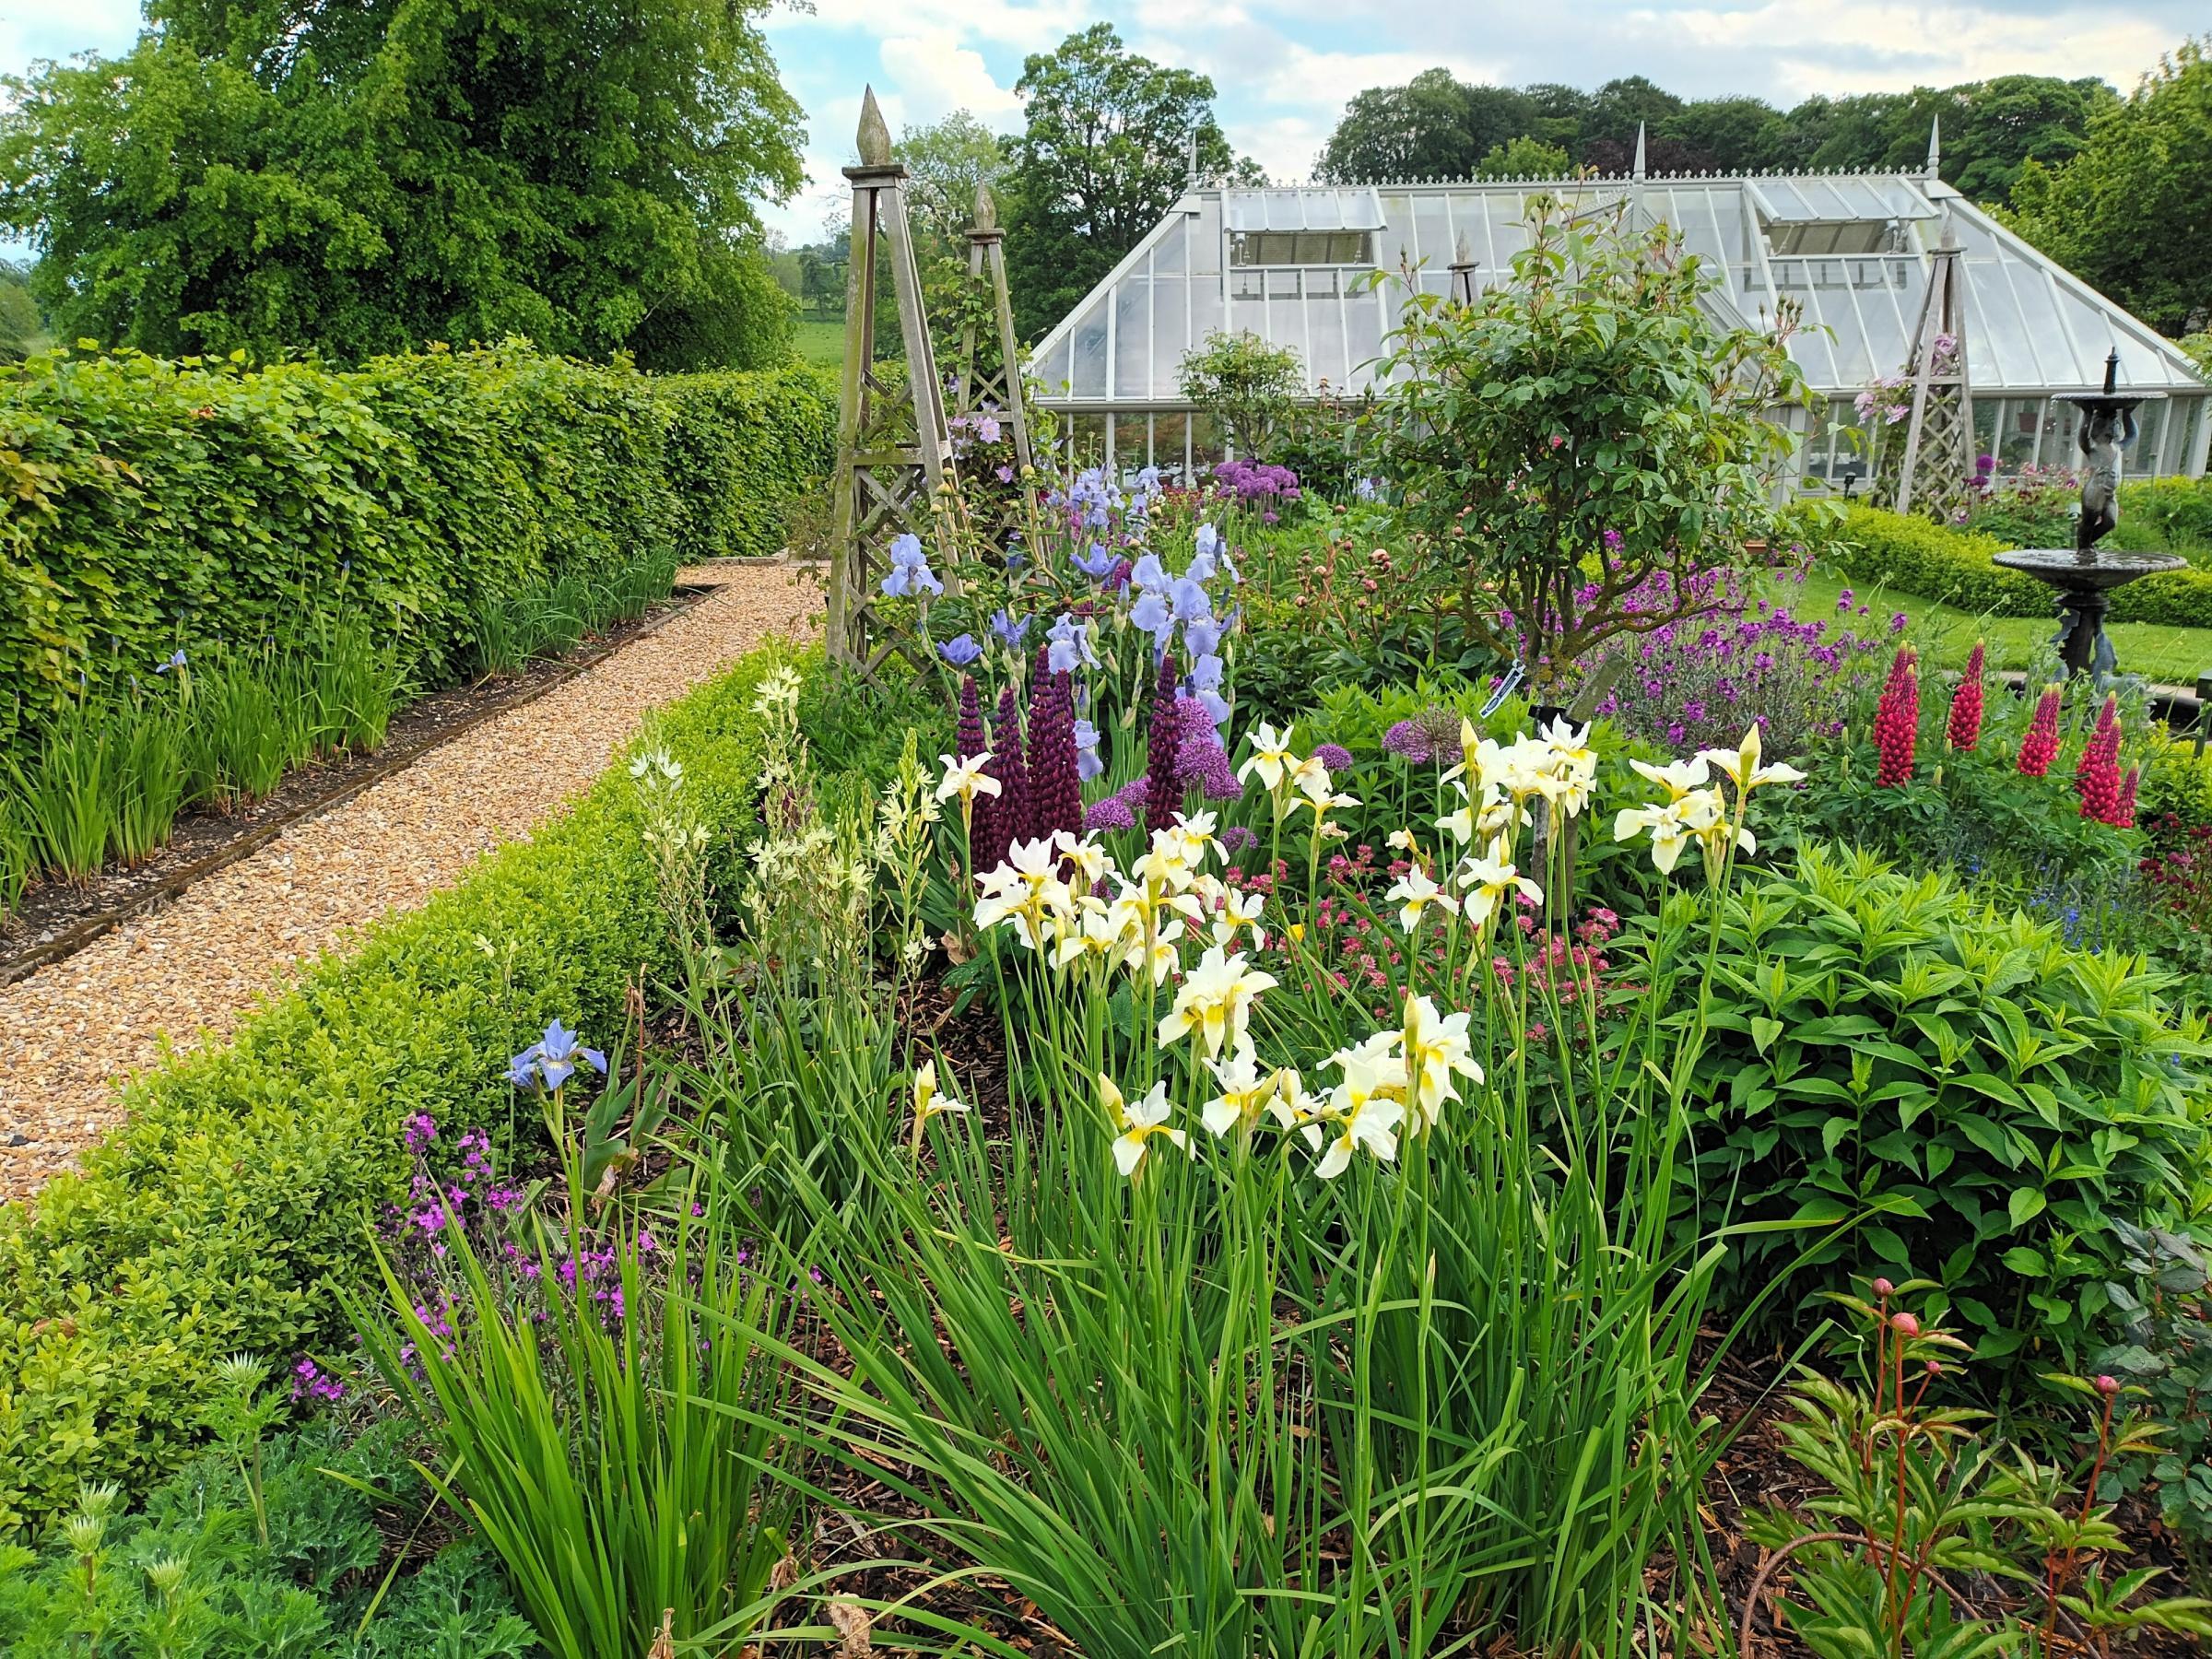 The gardens at Jervaulx Hall will open for a private event on June 20